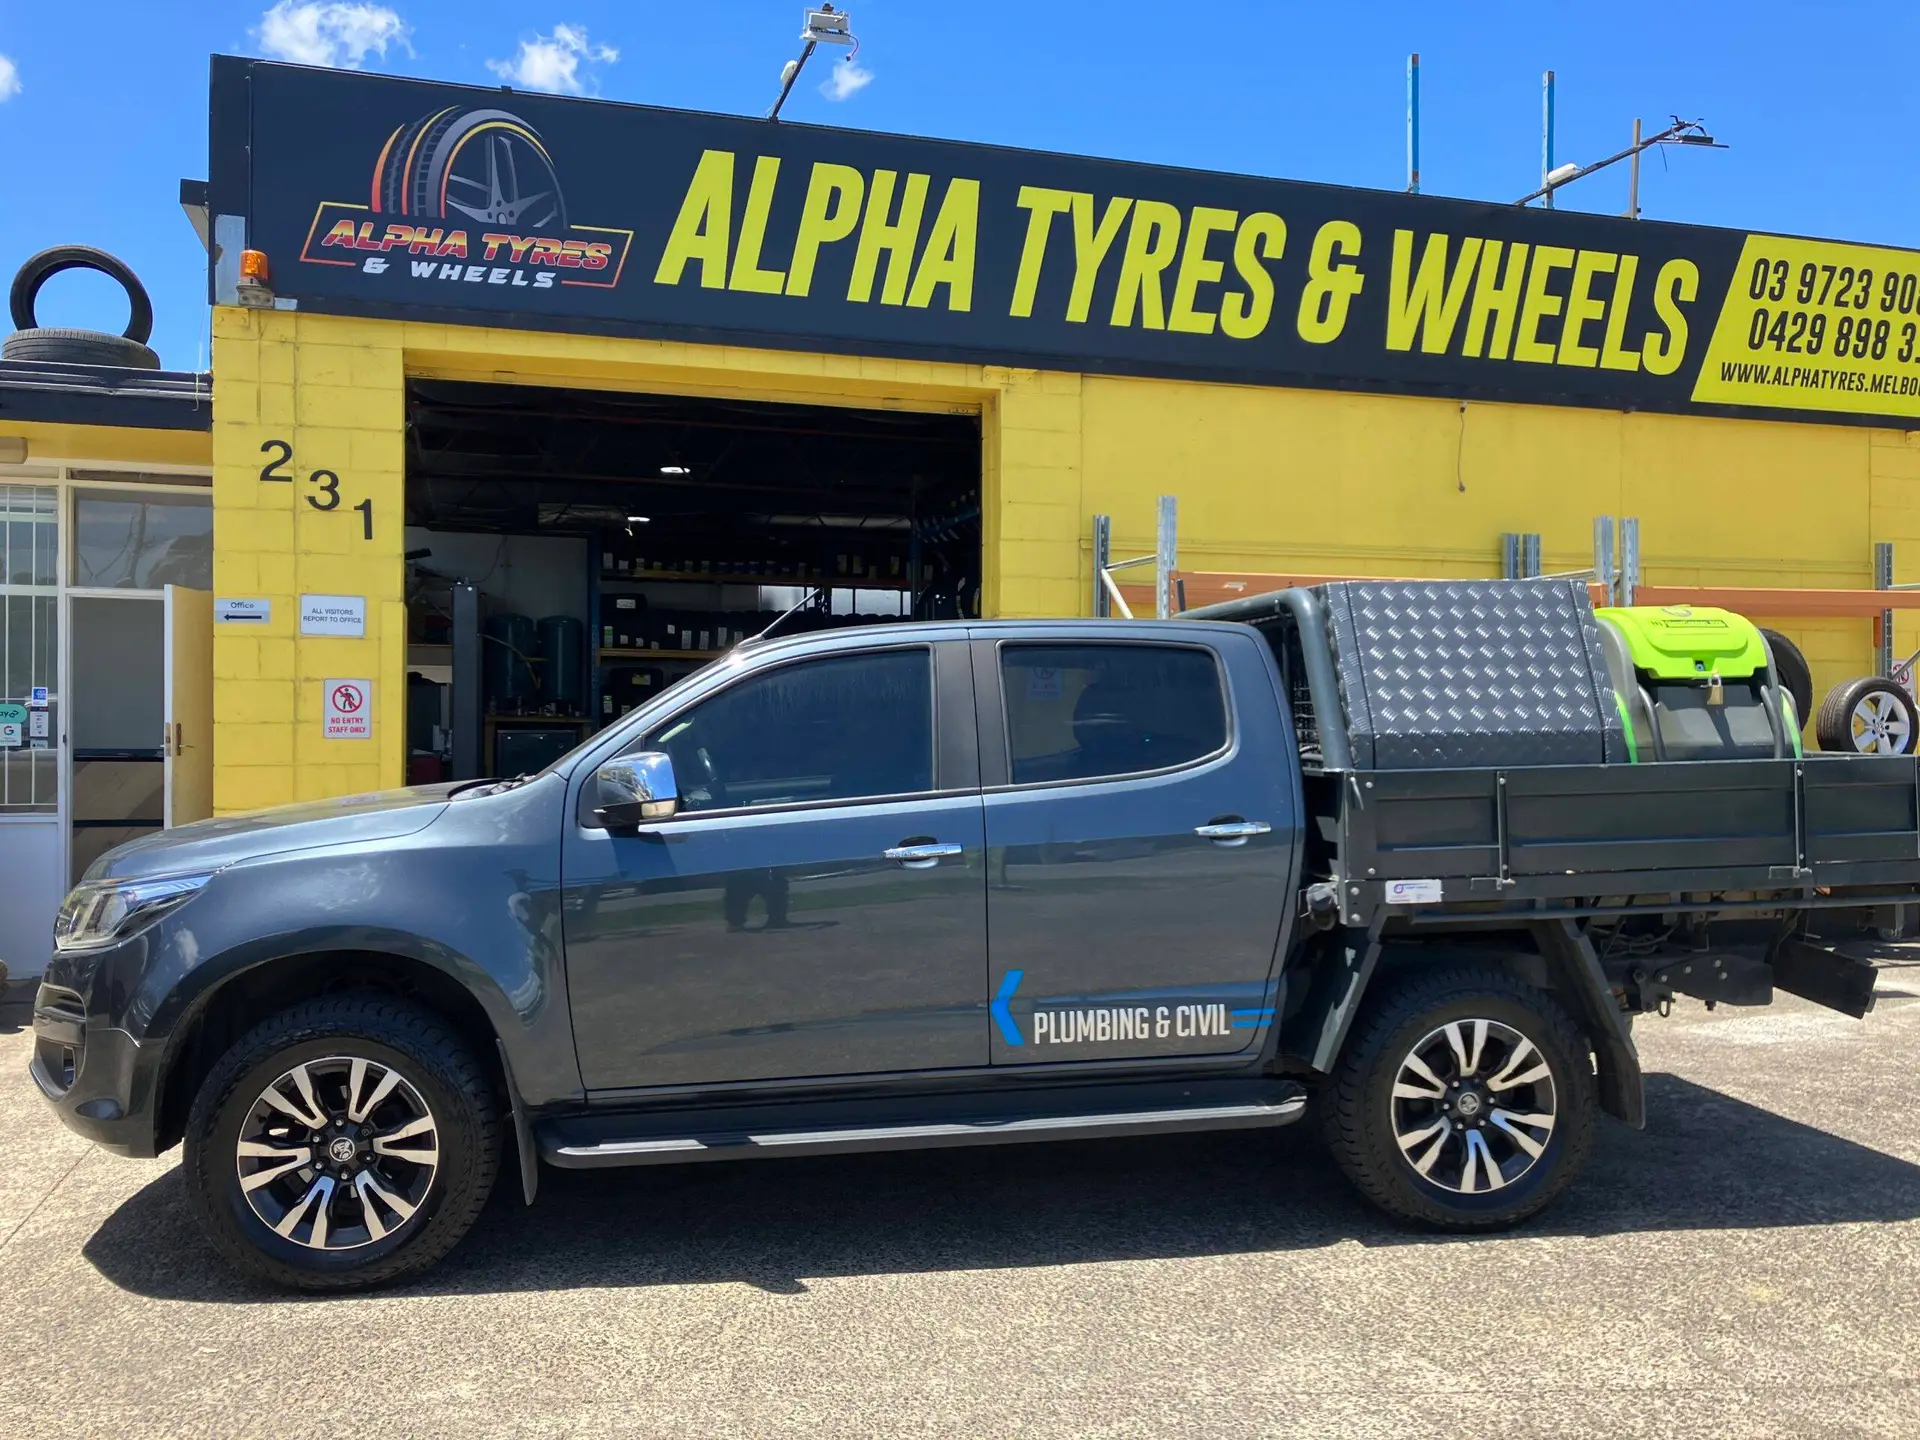 Revolutionize Your Tyre Experience at Alpha Tyres and Wheels Shop in Kilsyth!